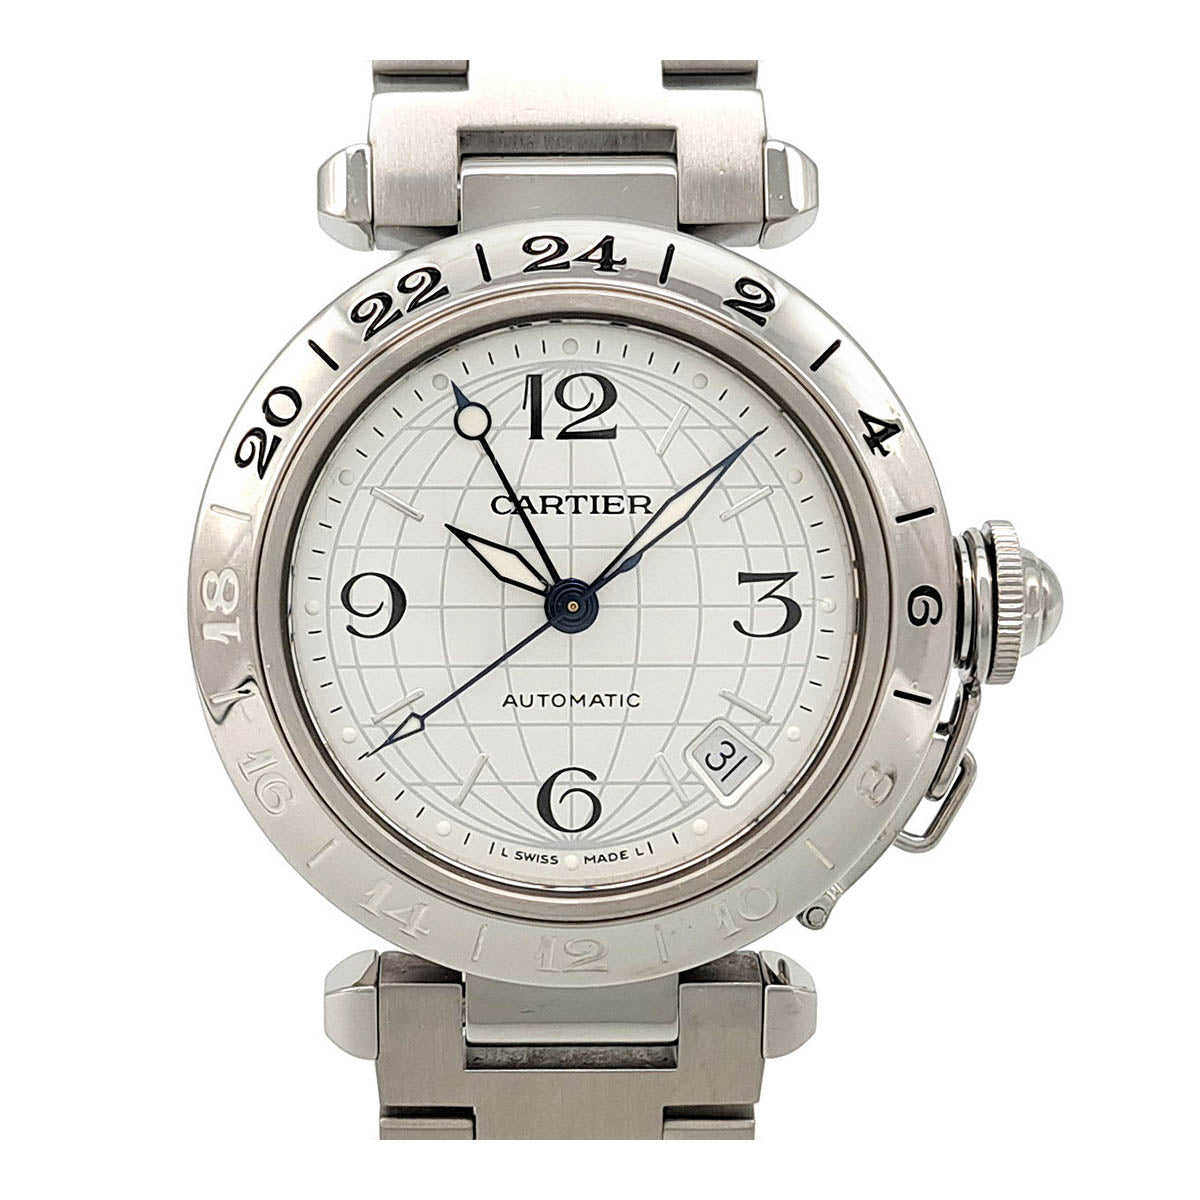 Cartier Pasha C Meridian W31078M7 Men's Automatic Watch in Stainless Steel (Pre-owned) W31078M7